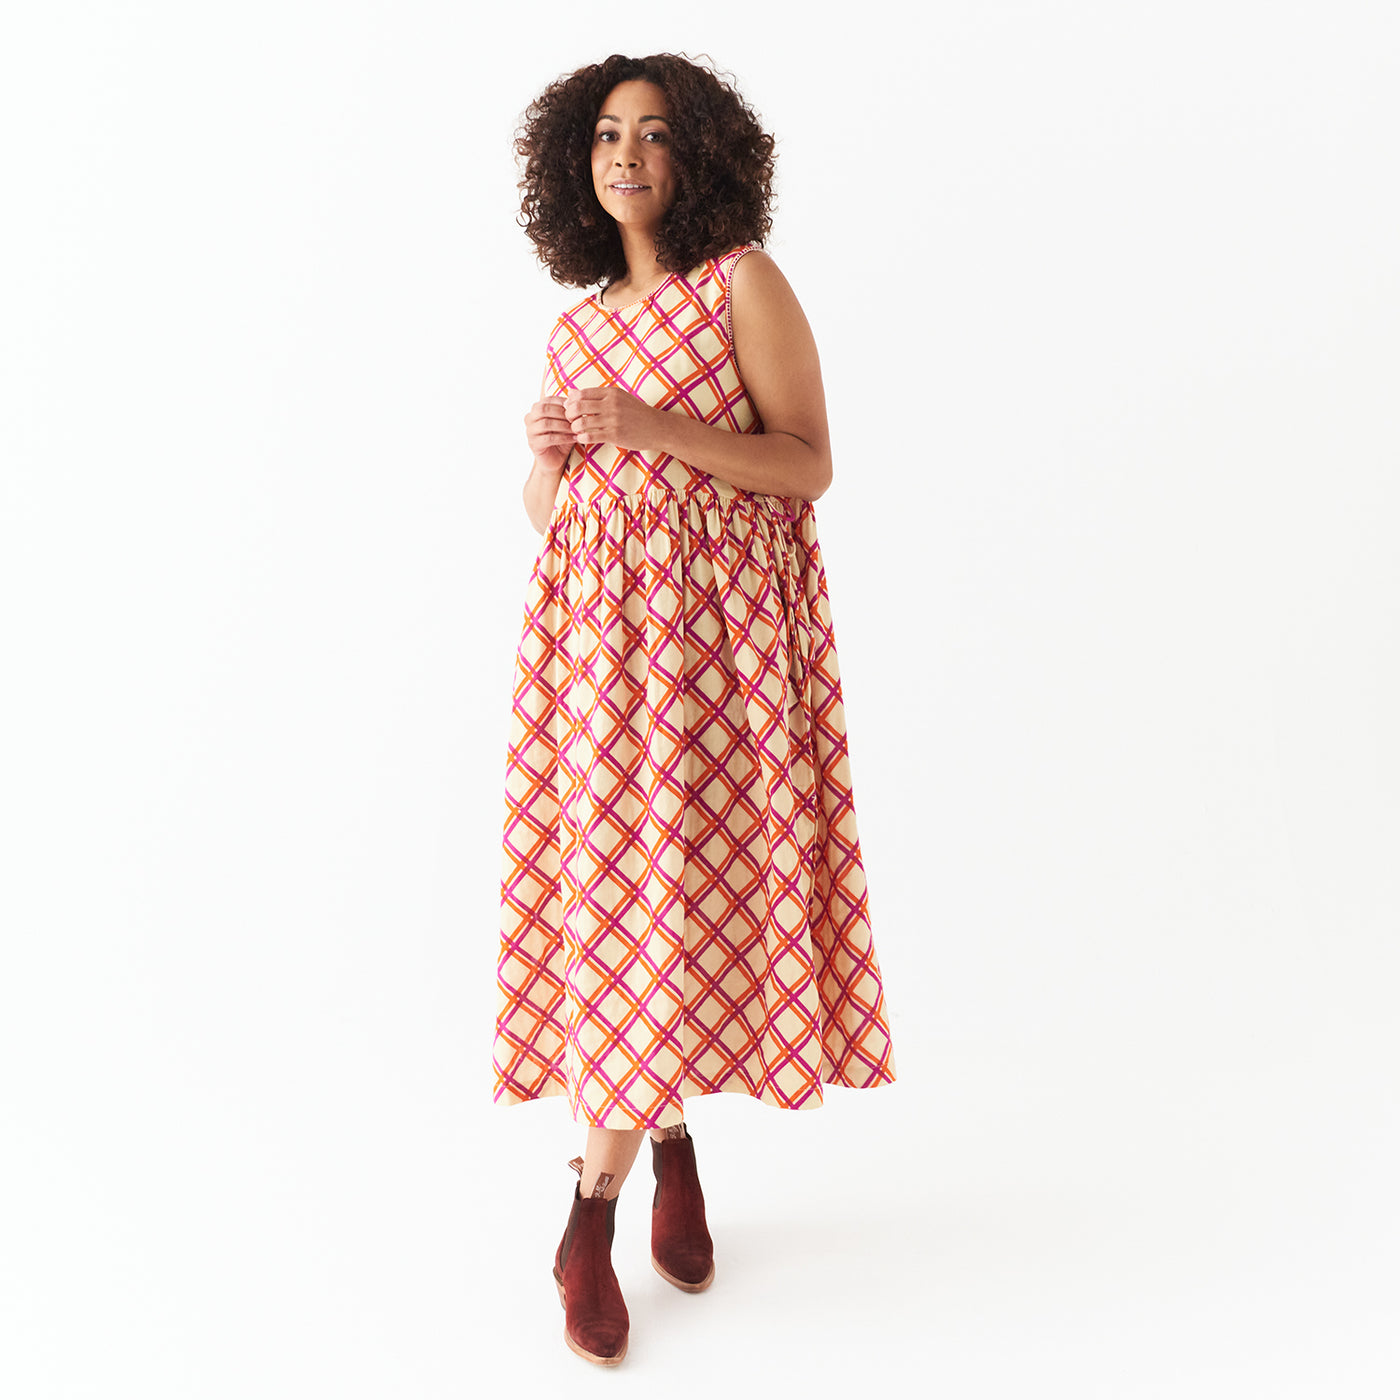 Sage x Clare Celeste Collection Romy Check Dress